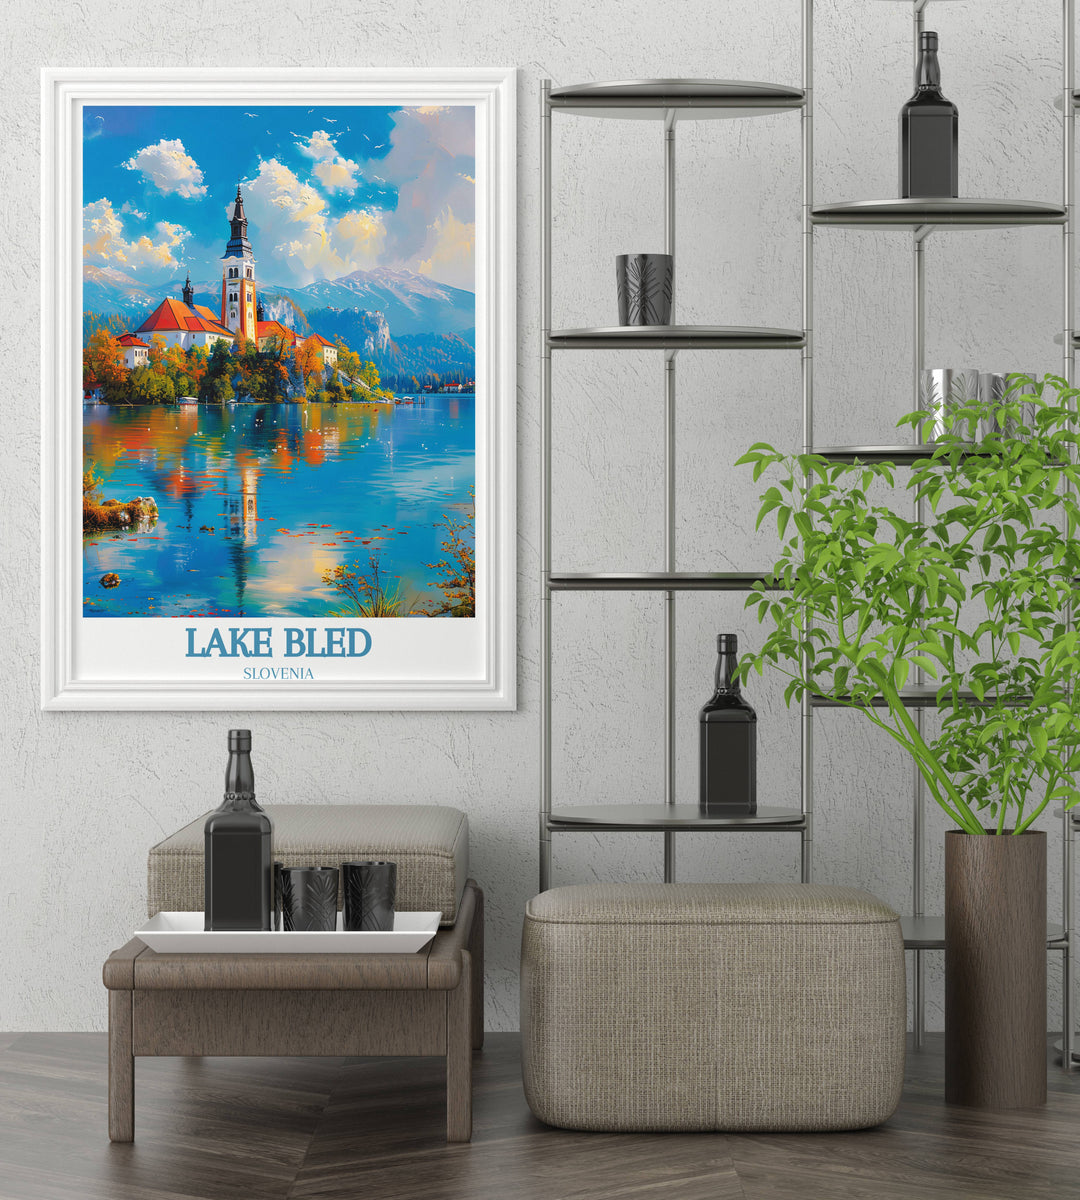 Classic view of Bled Island with its serene setting and reflective waters an excellent choice for Lake Bled Wall Print in living spaces